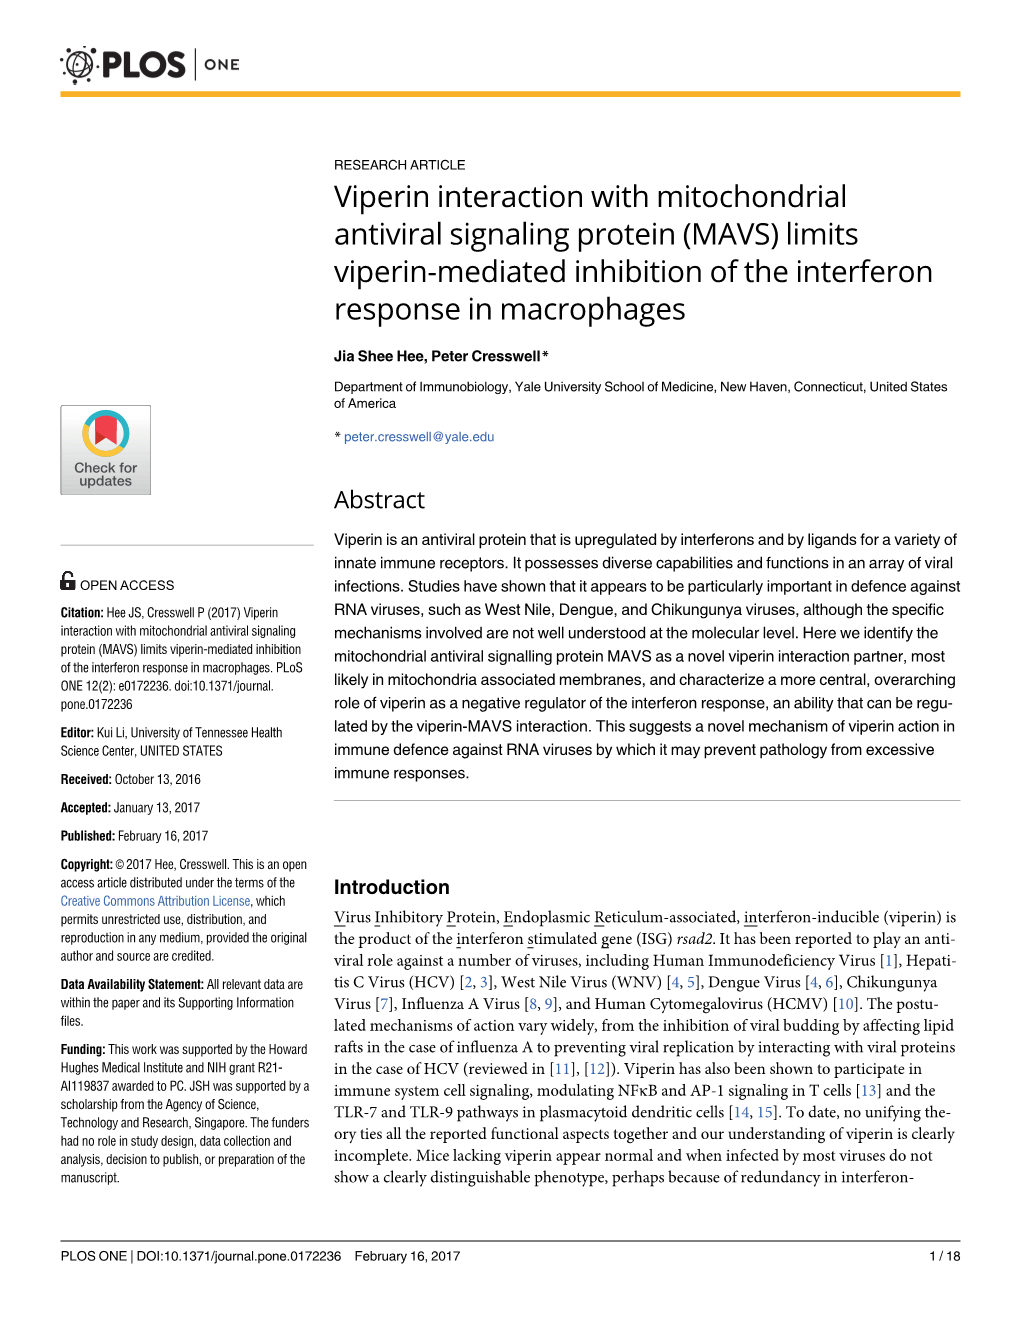 Viperin Interaction with Mitochondrial Antiviral Signaling Protein (MAVS) Limits Viperin-Mediated Inhibition of the Interferon Response in Macrophages